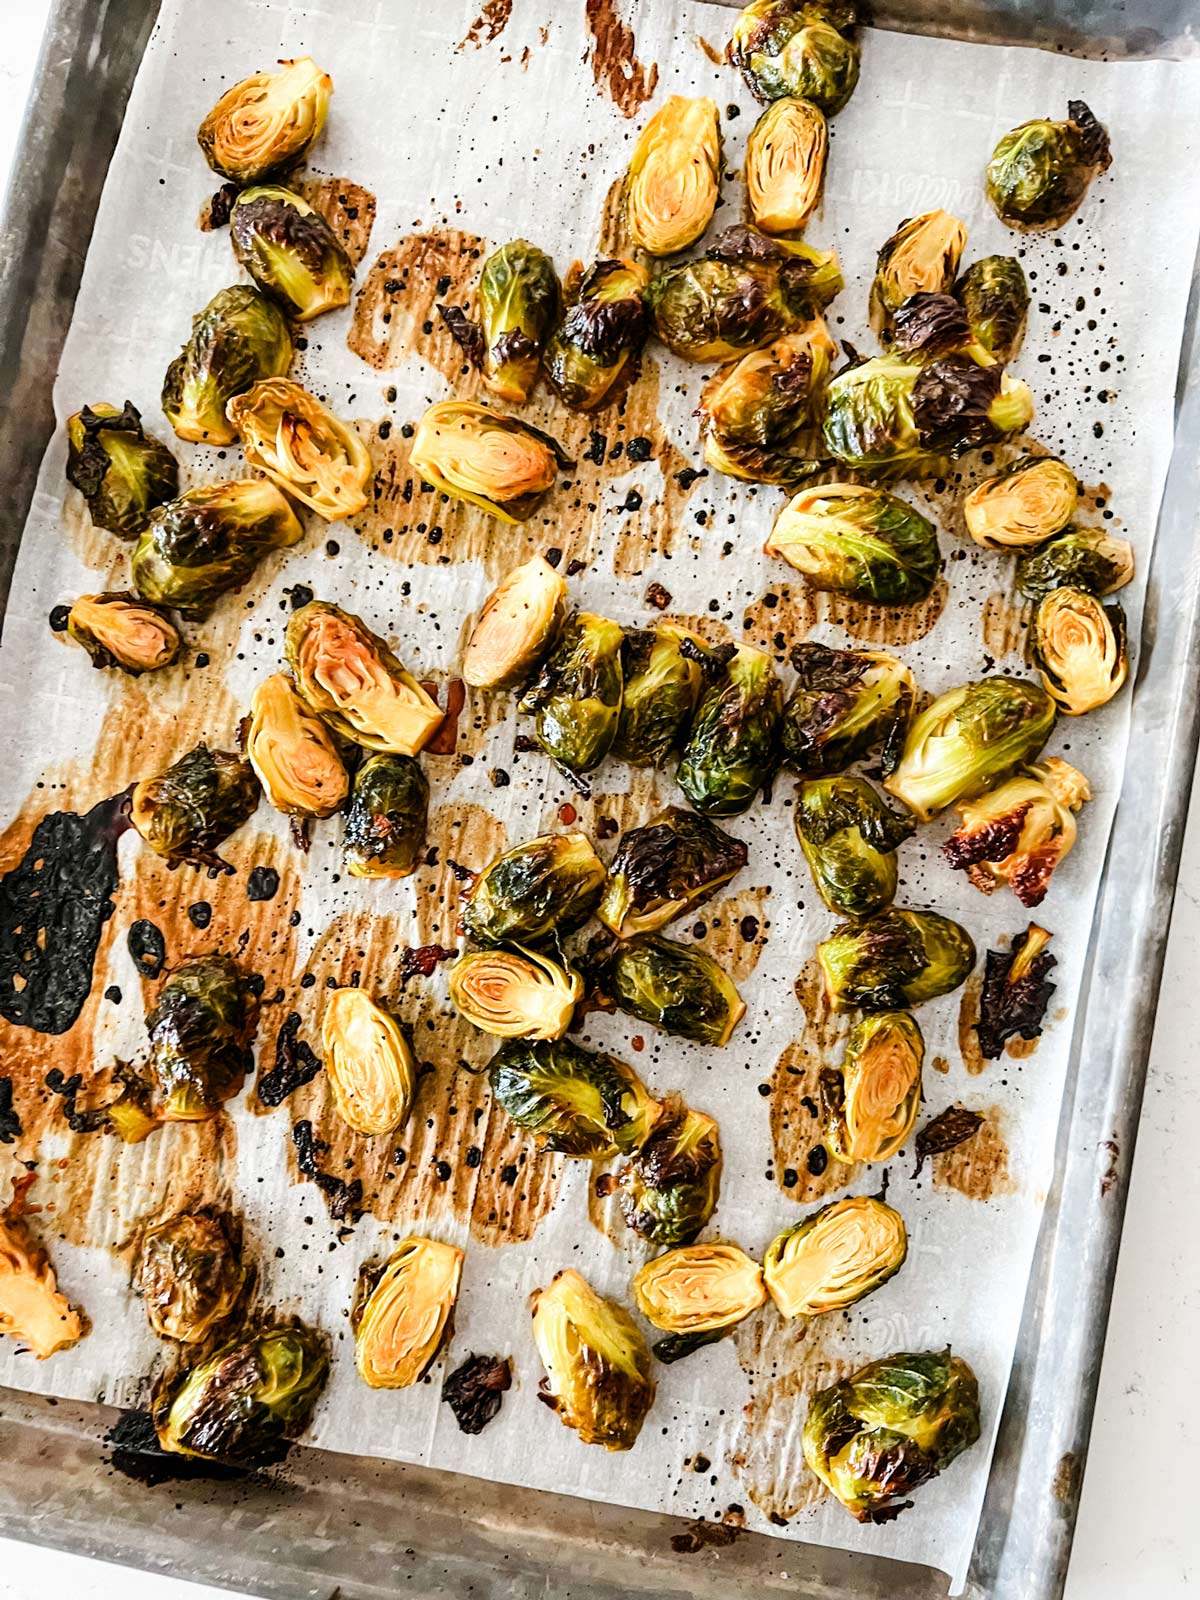 Overhead photo of roasted brussels sprouts on a parchment lined baking sheet.